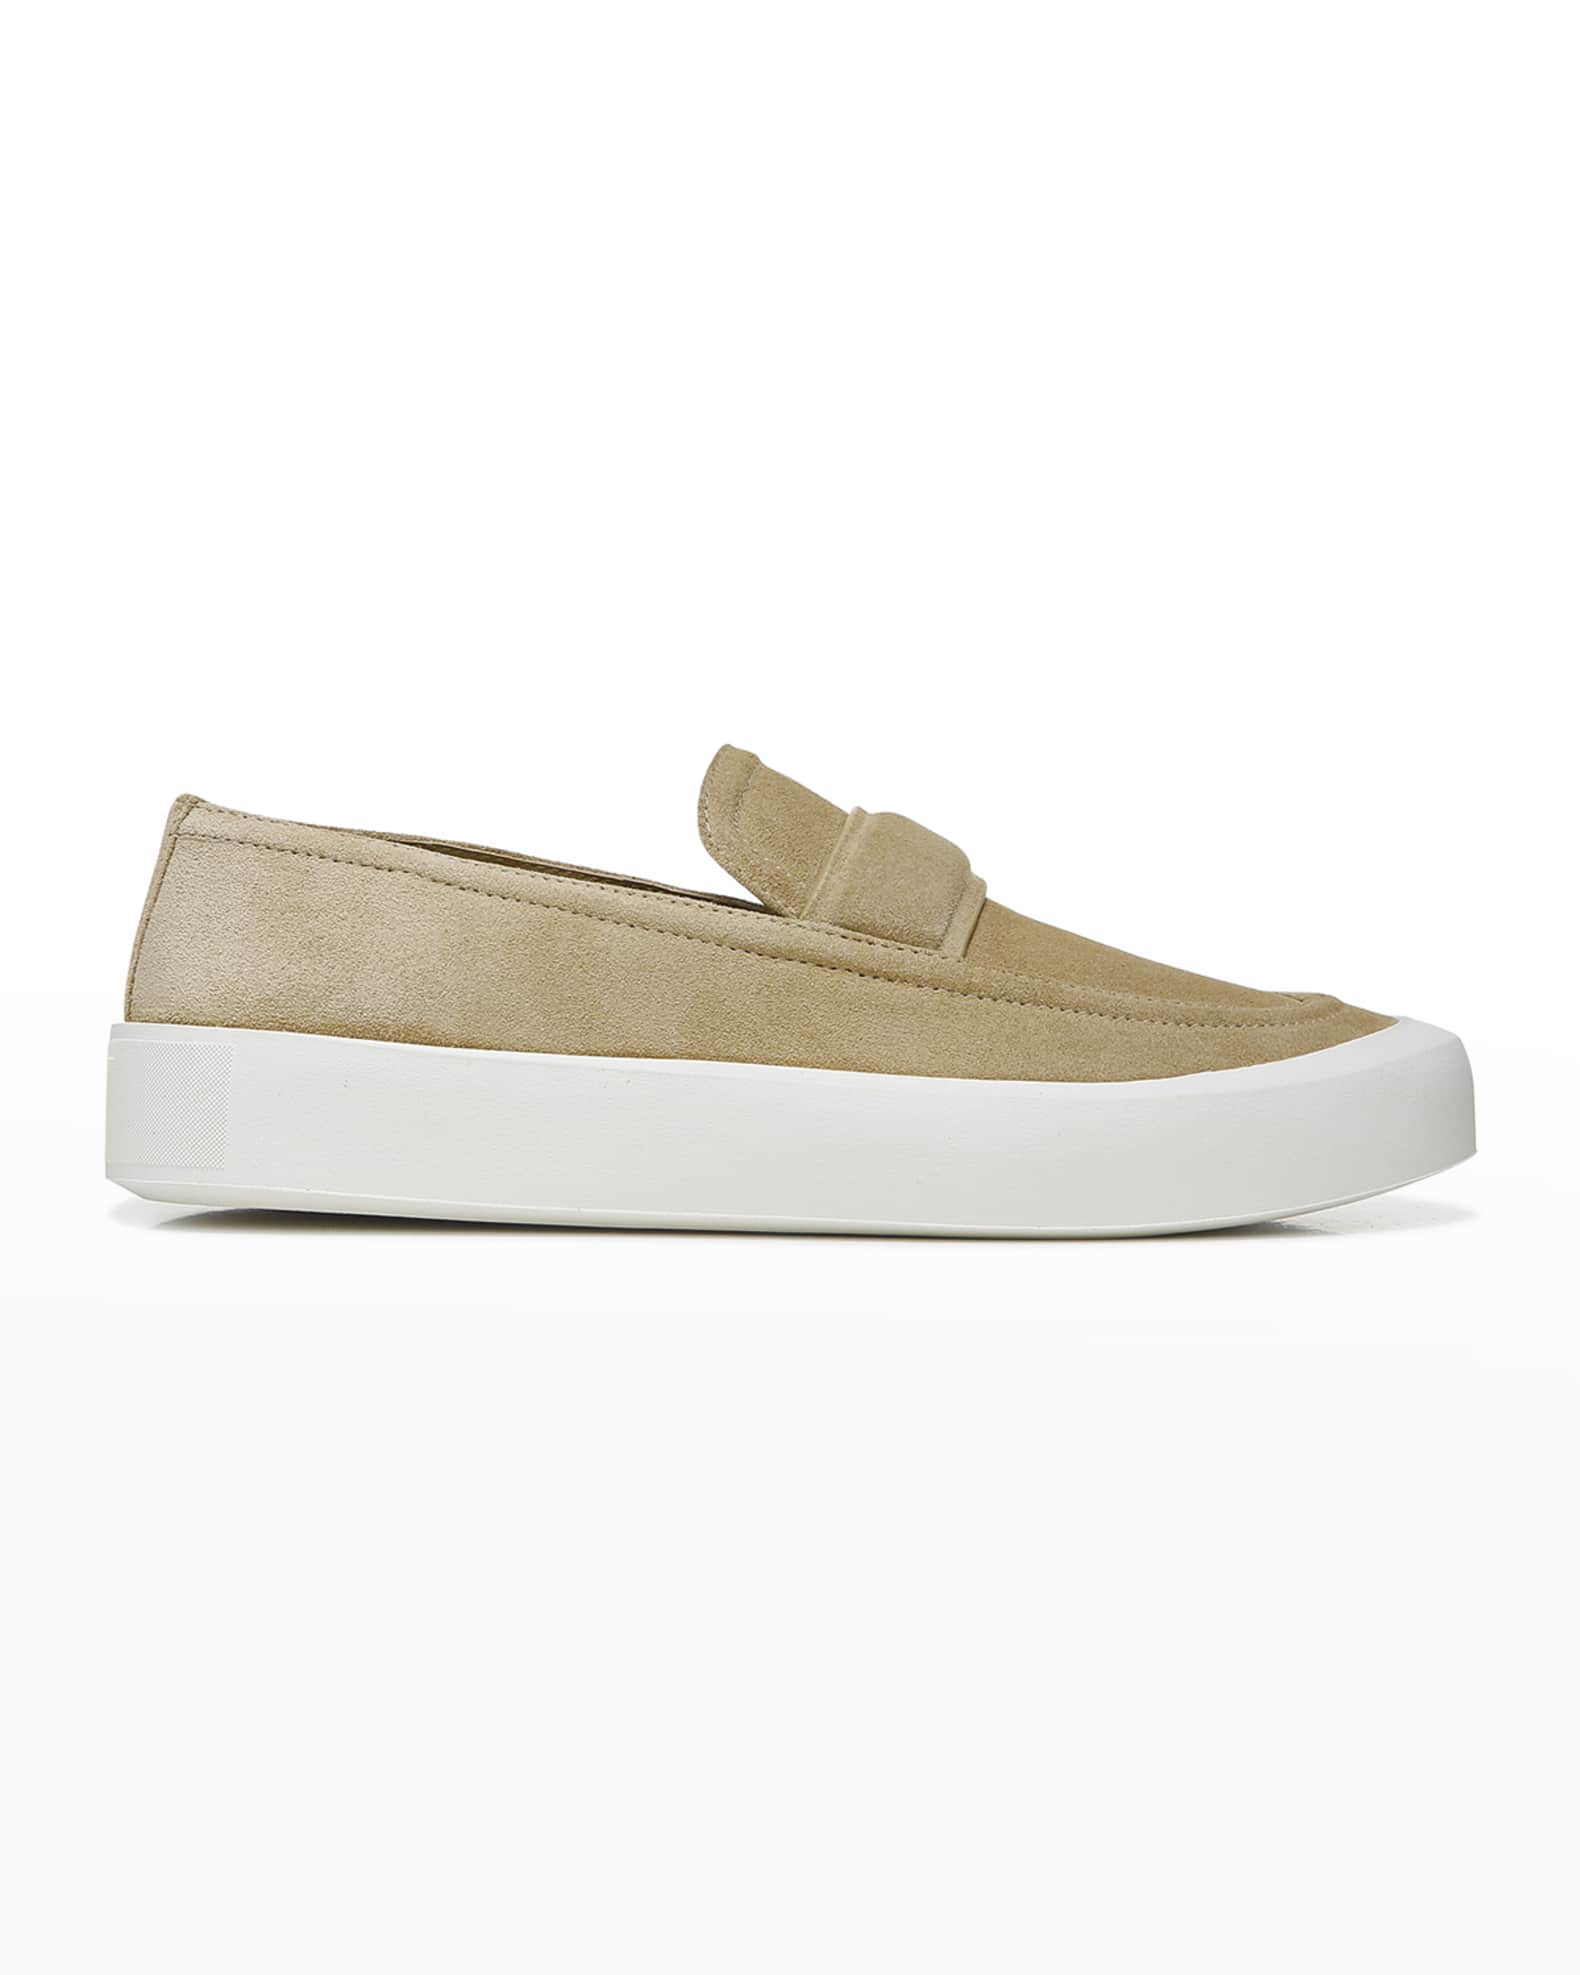 Vince Ghita Suede Slip-On Loafer Sneakers | Neiman Marcus